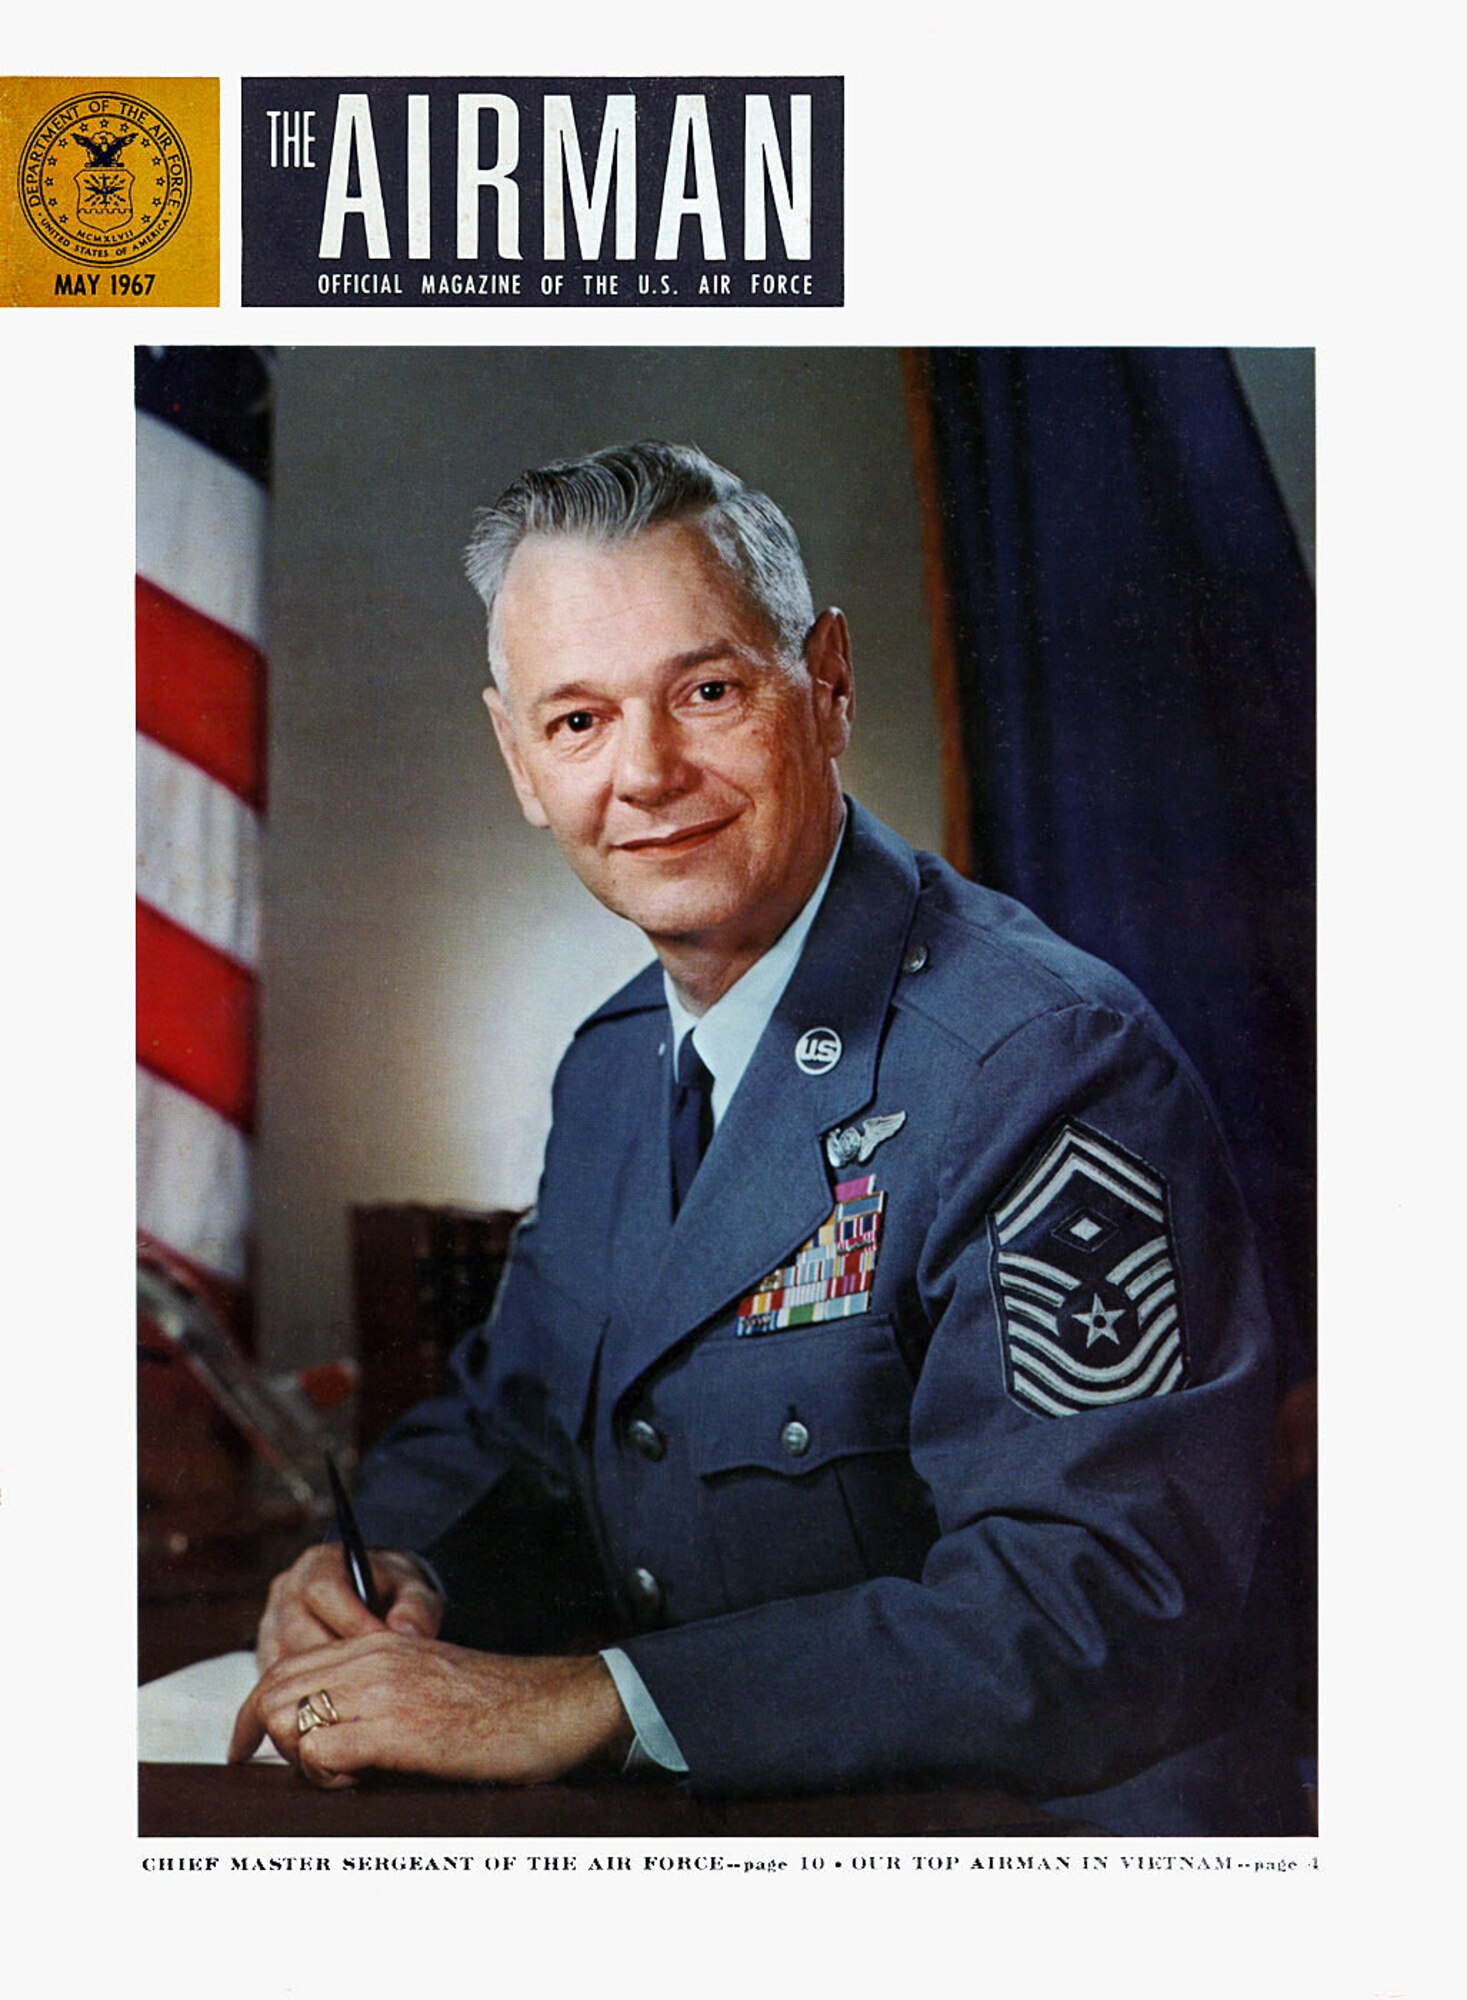 The cover of the May 1967 issue of Airman magazine announced the creation of a new NCO leadership position, Chief Master Sergeant of the Air Force, and the appointment of Chief Master Sgt. Paul Airey as the first to fill the position. (U.S. Air Force photo)